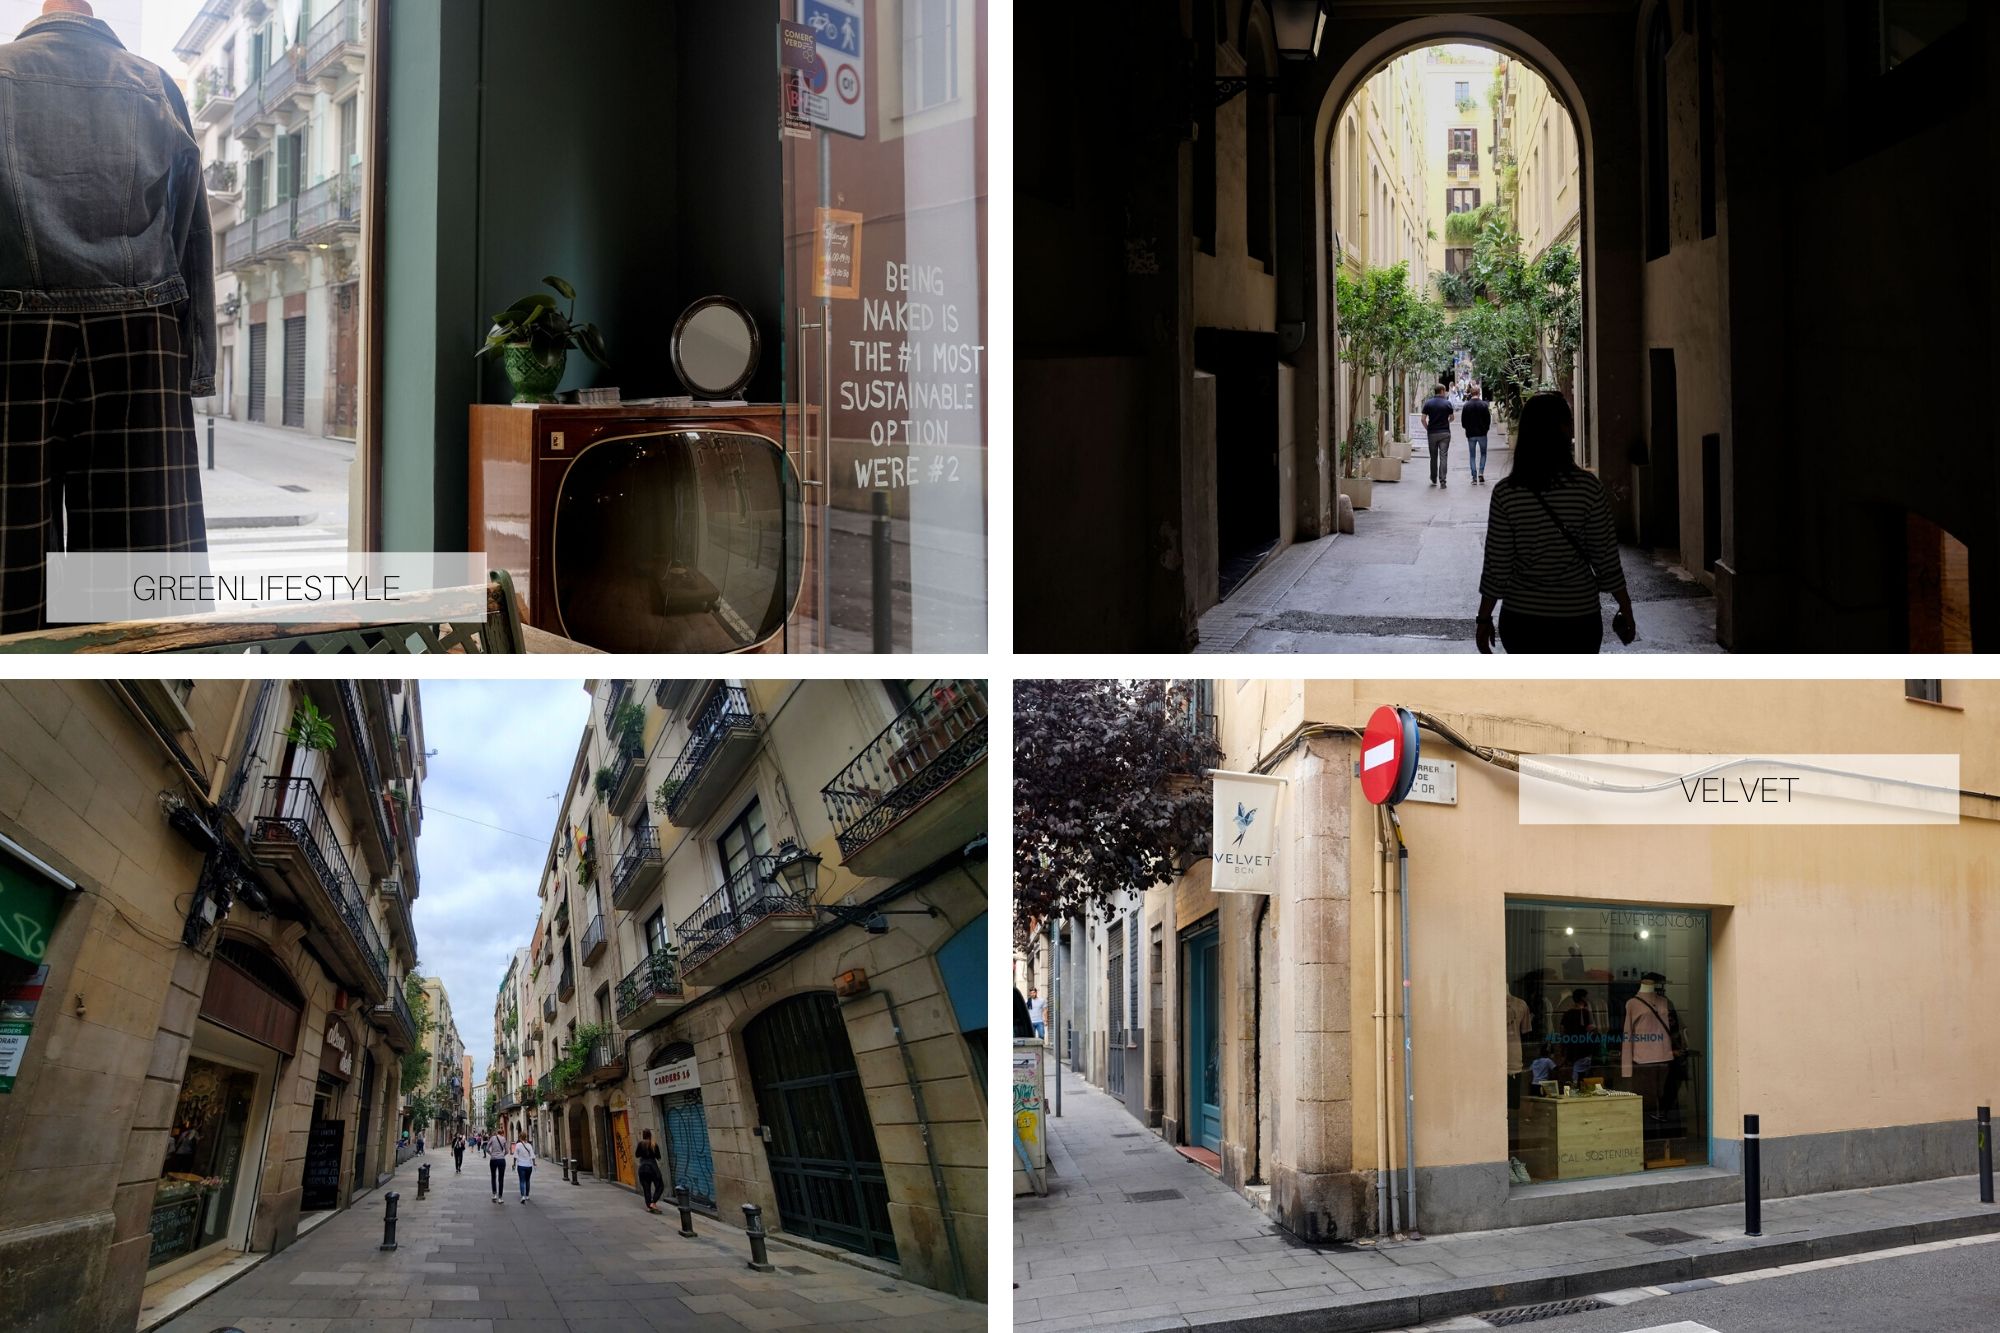 Collage: Streets of Barcelona and exterior of shops